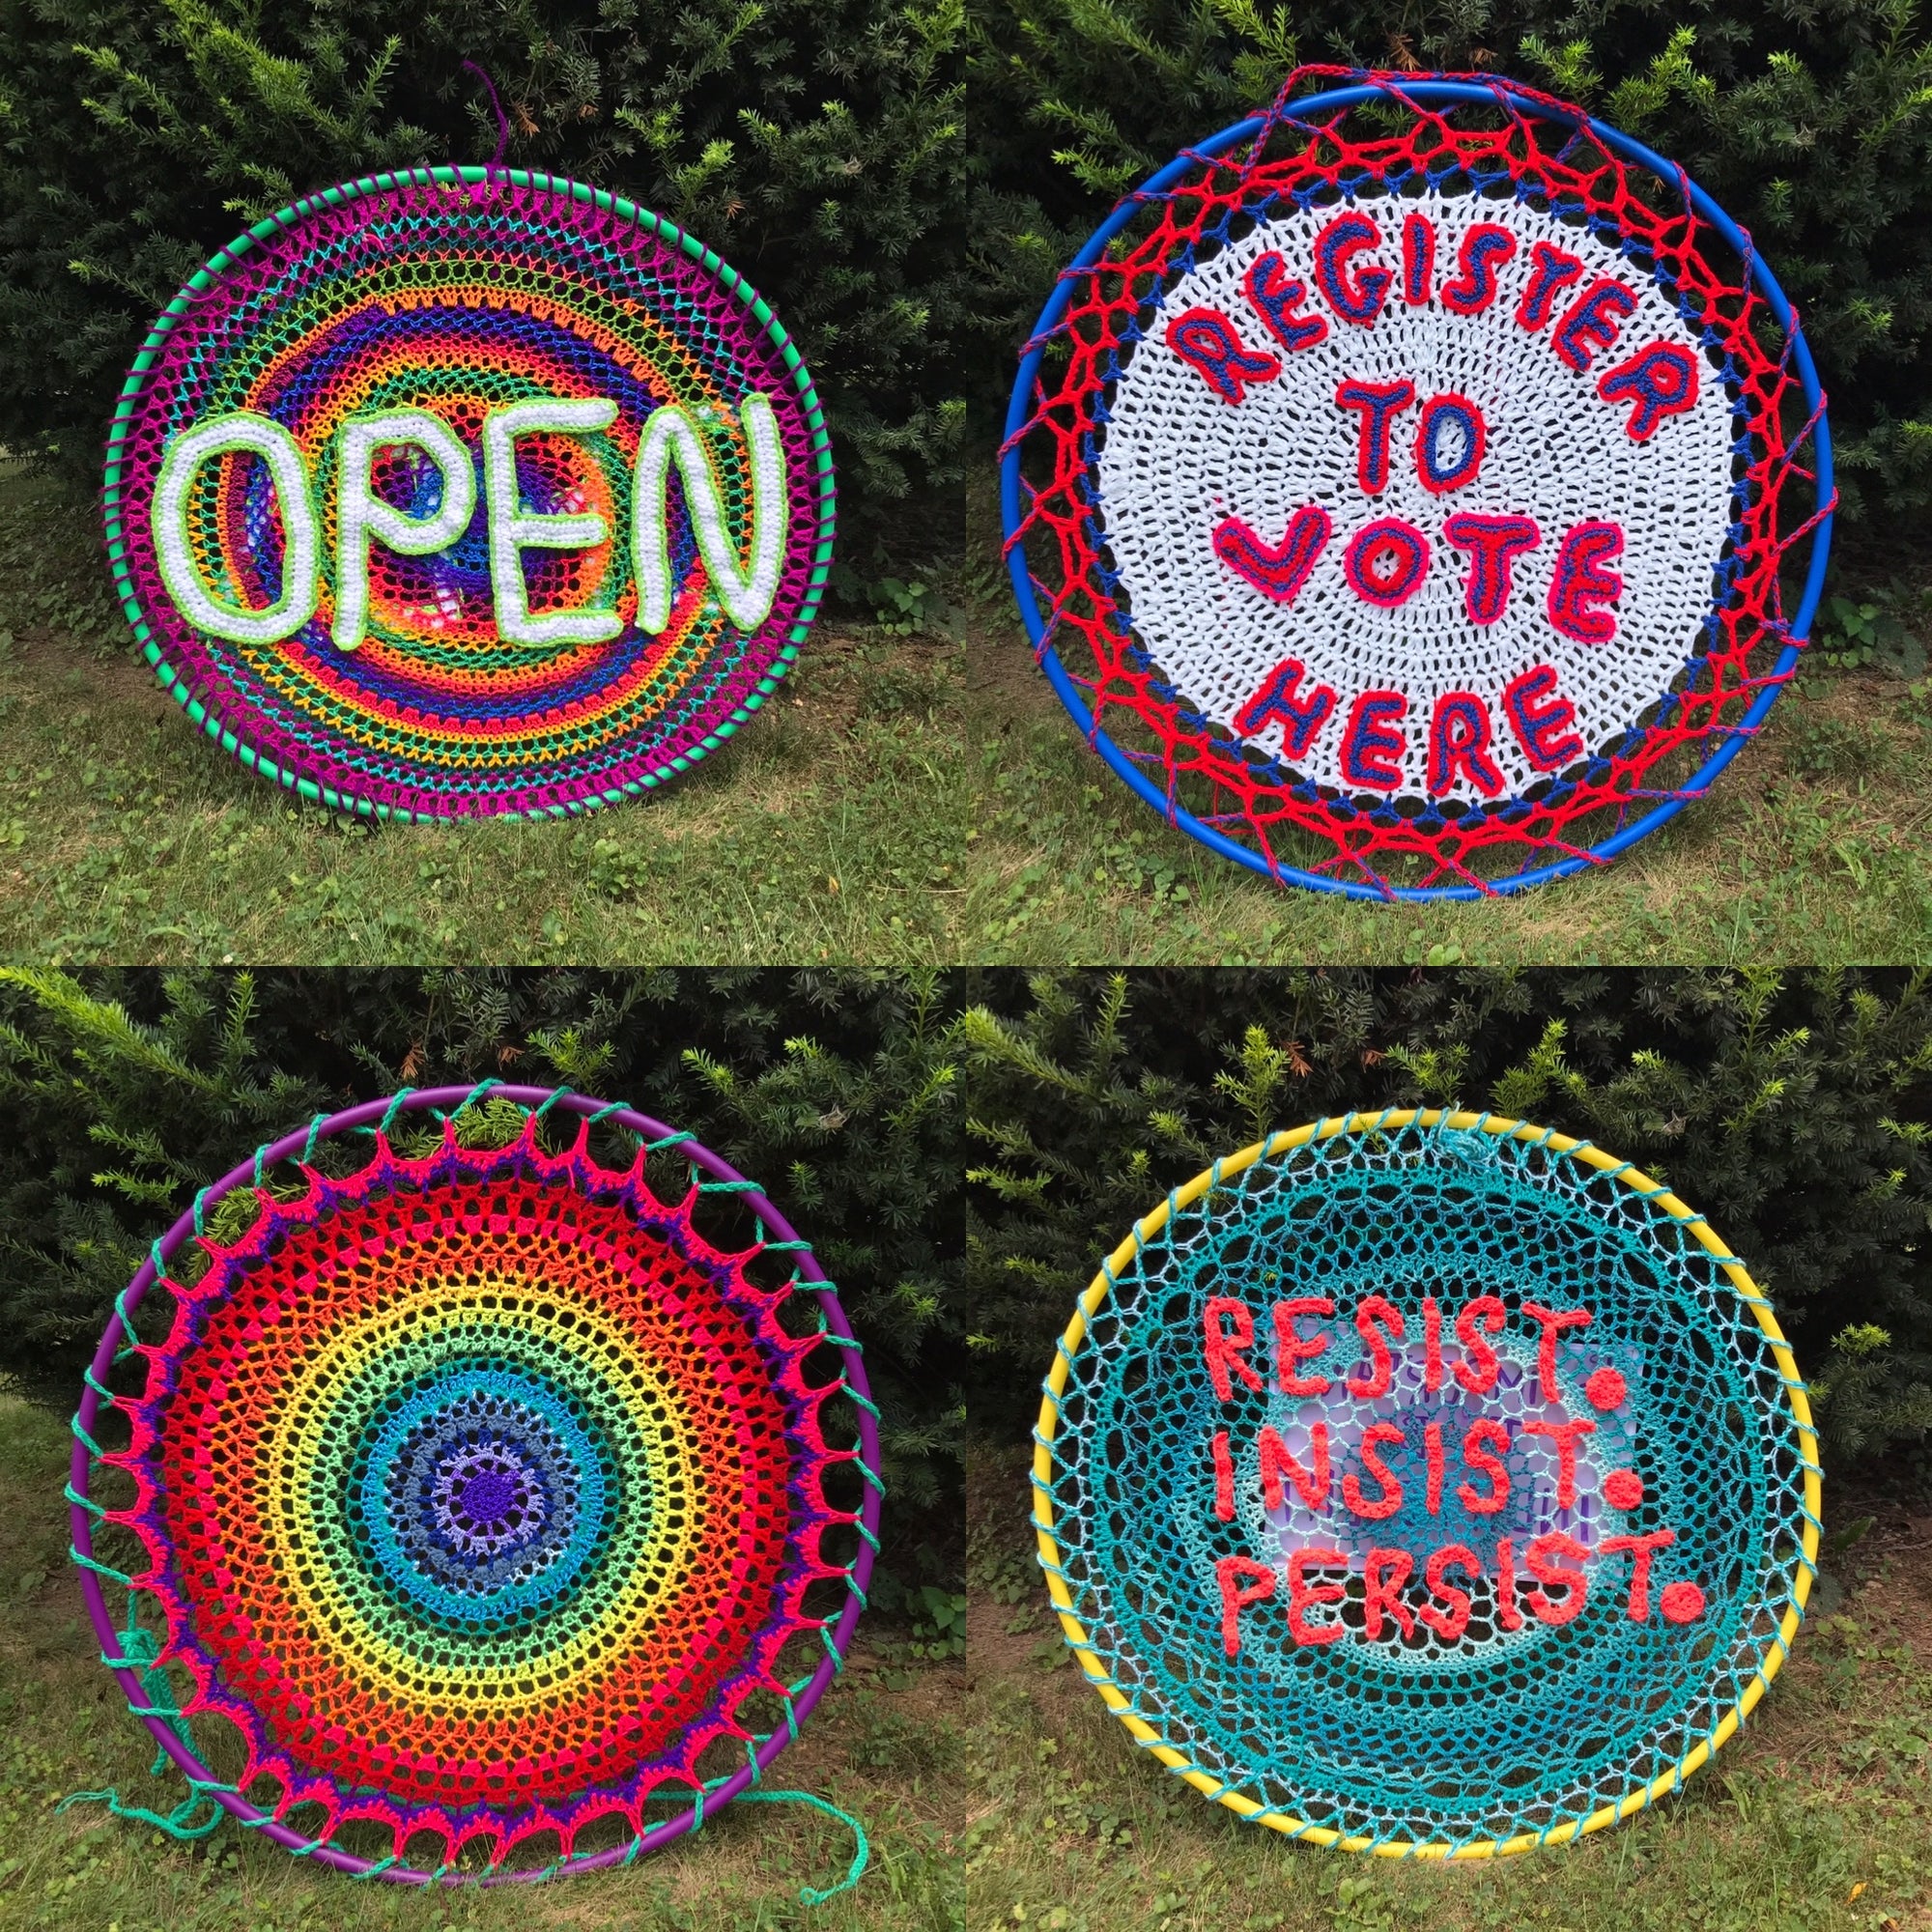 Hang it!  Wear it! Rally and Protest Sign to wear!  36” round hula hoop Create your own Sign!